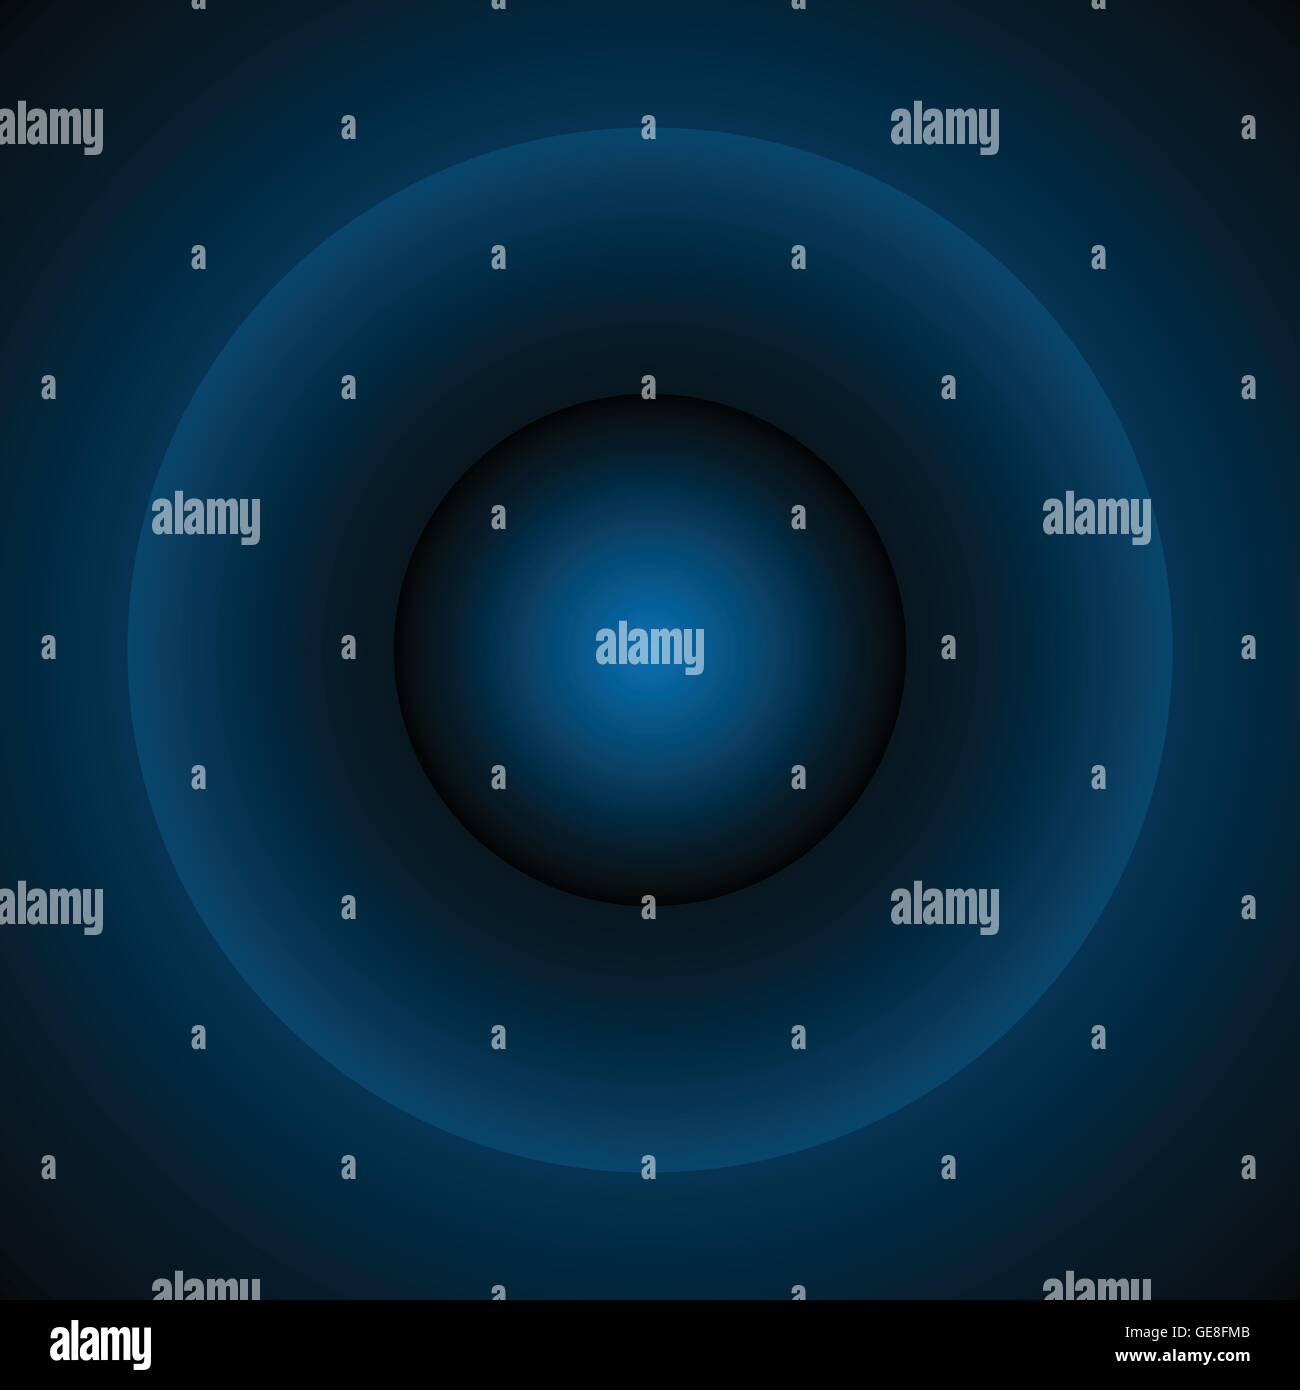 Glowing circle with transparency. Faded light effect. Emission ...